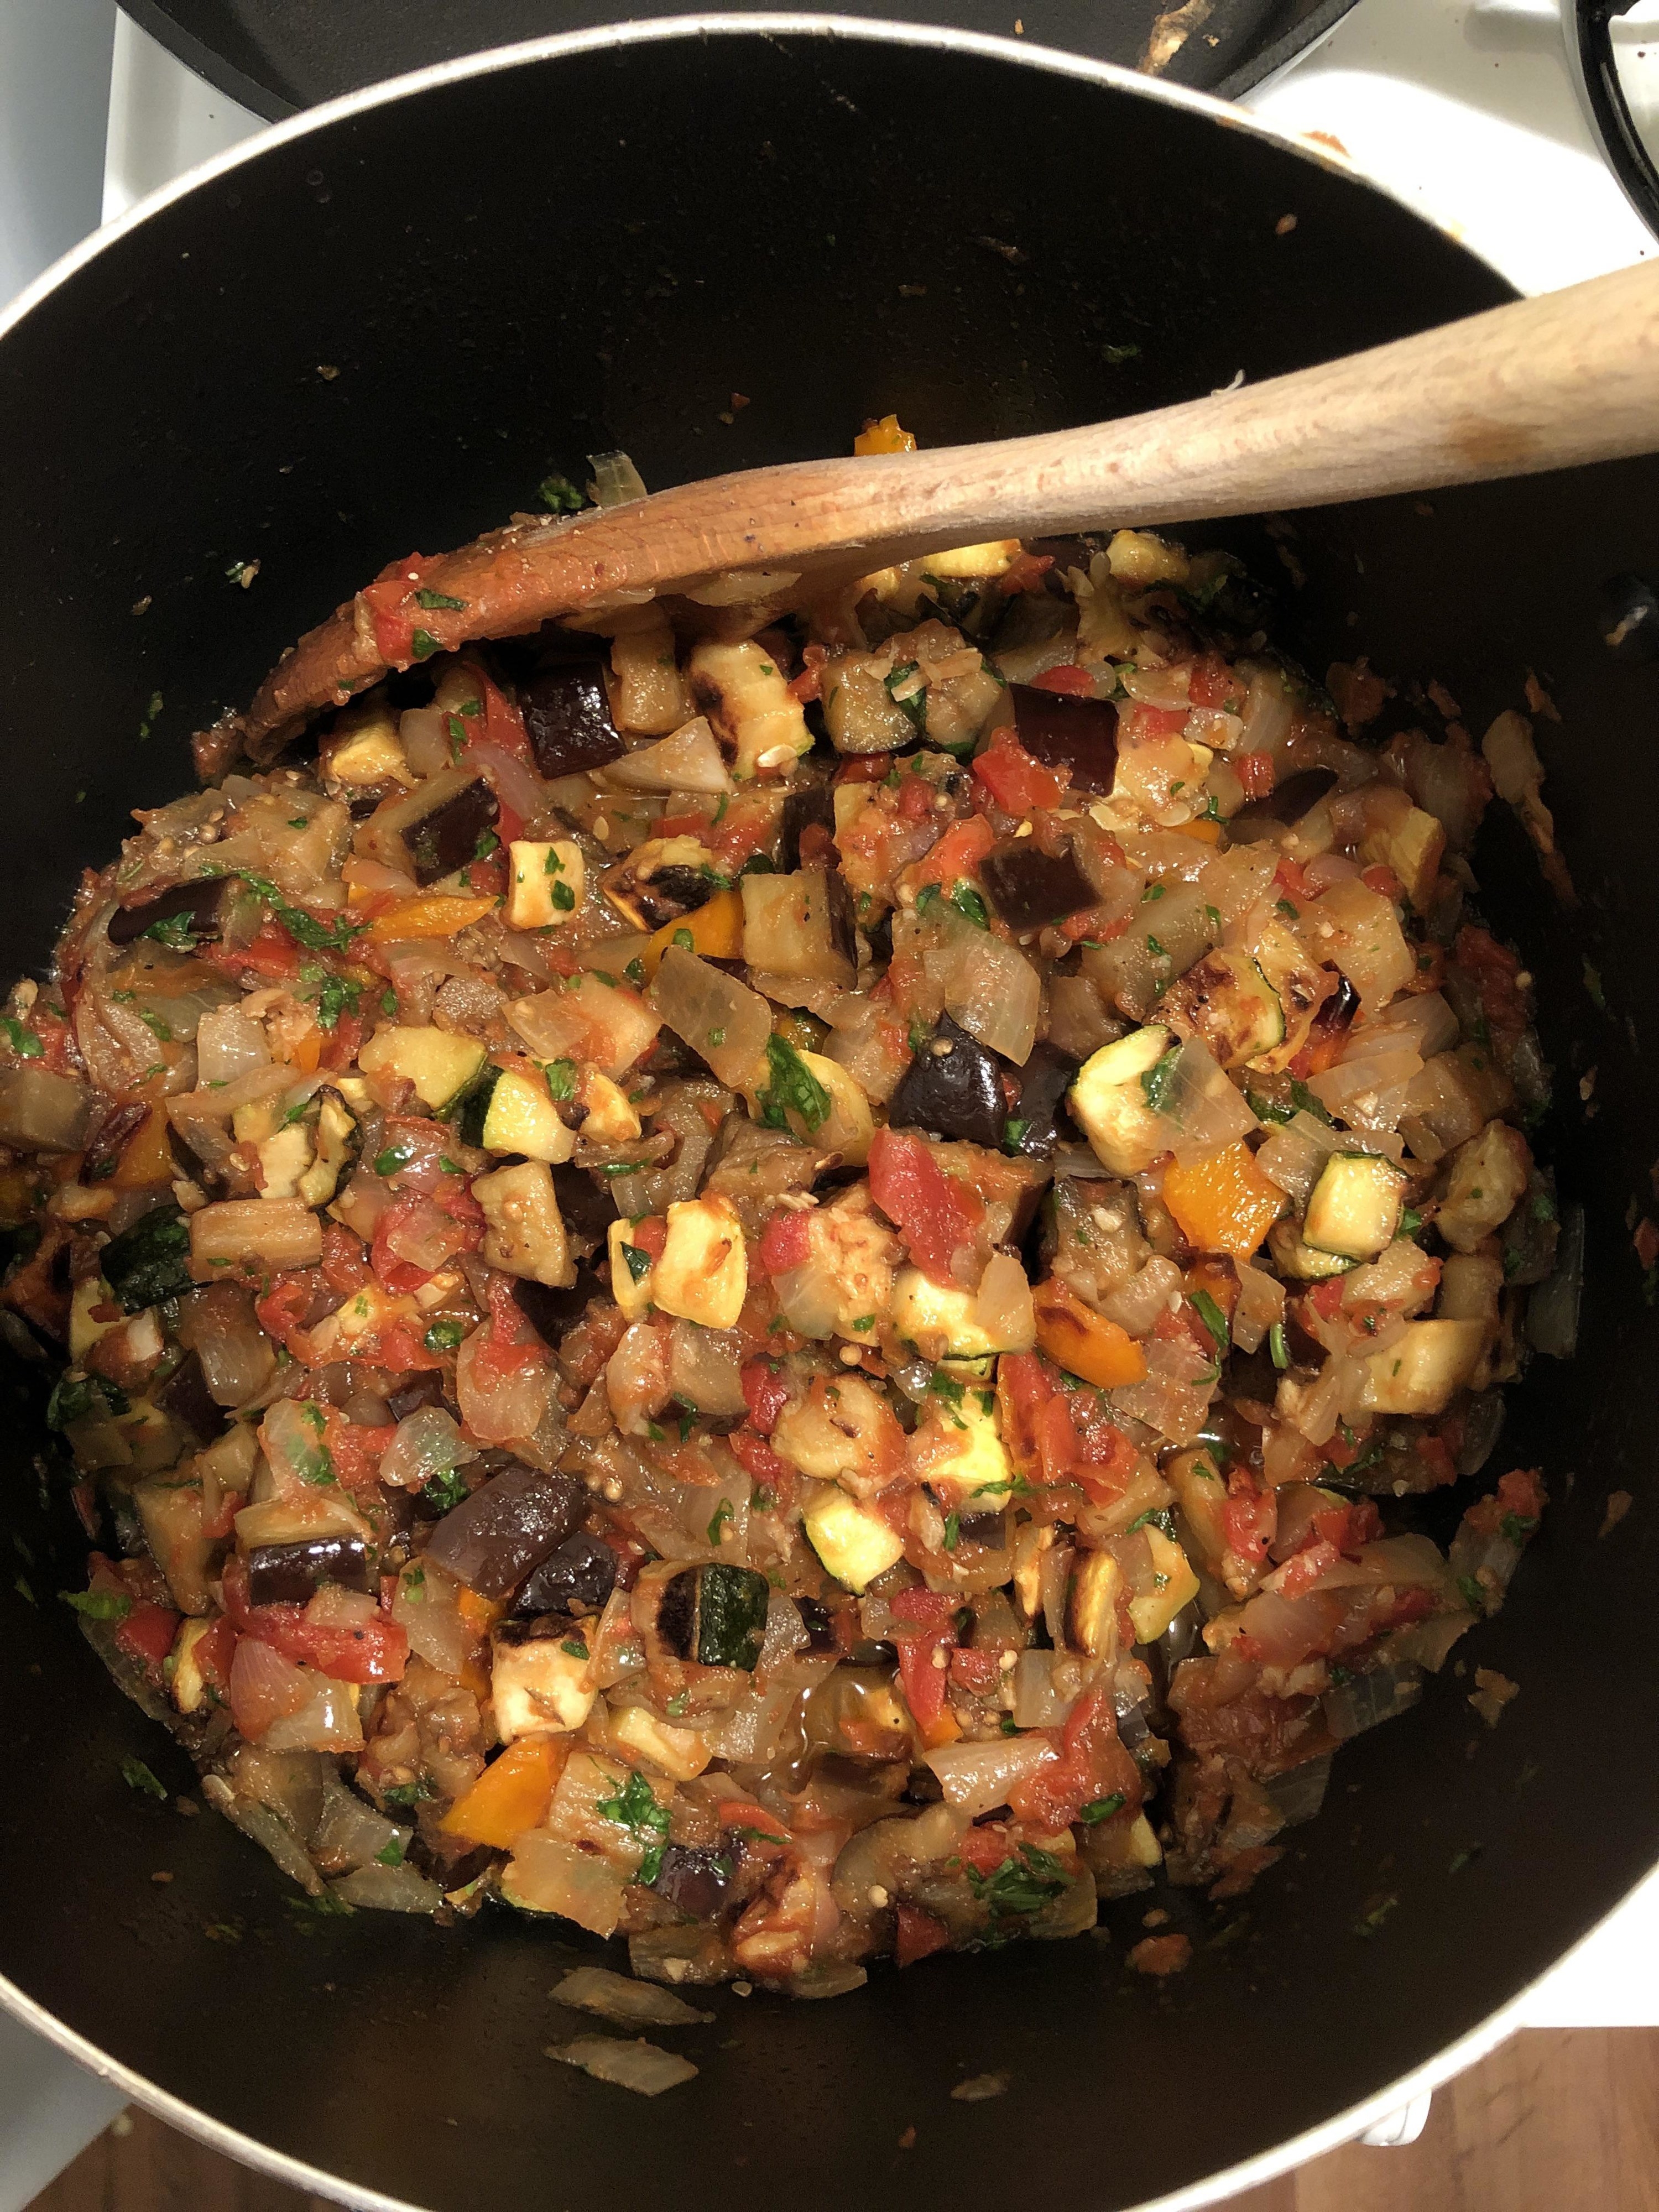 pot of ratatouille with eggplant, zucchini, tomatoes, and more